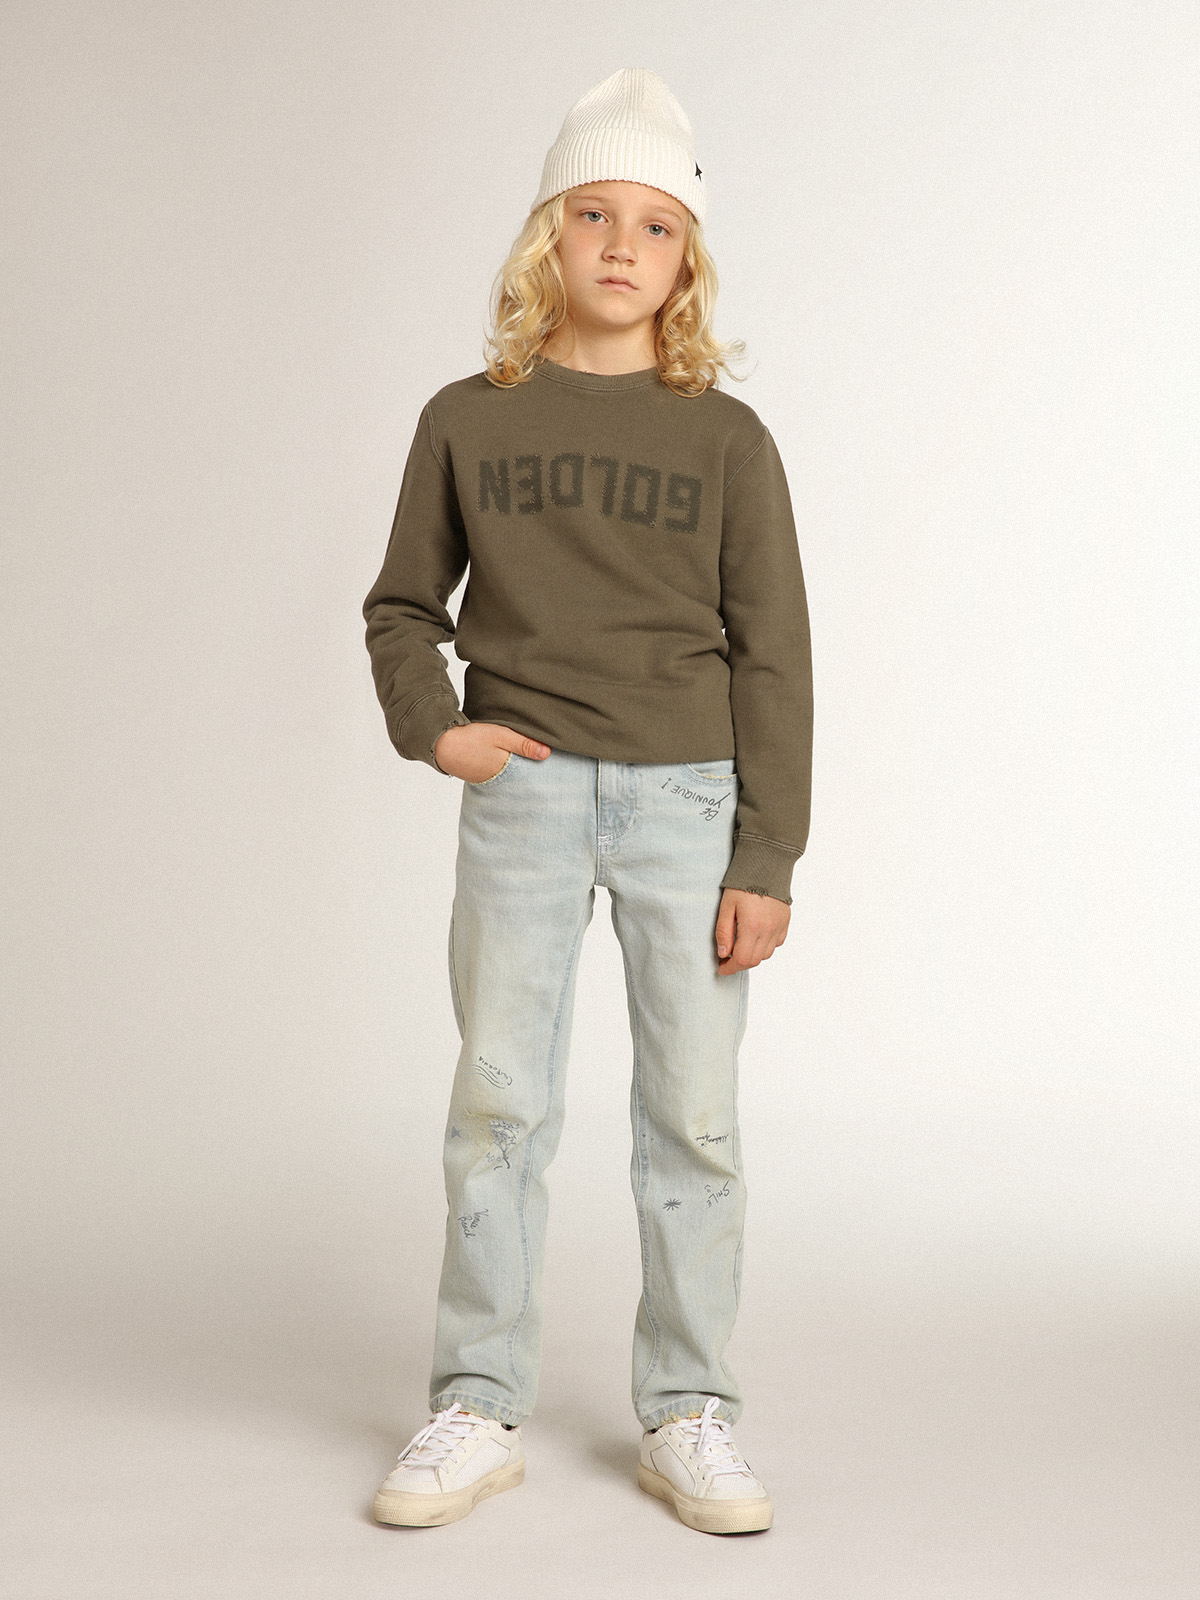 Distressed olive-green sweatshirt with Golden lettering on the 